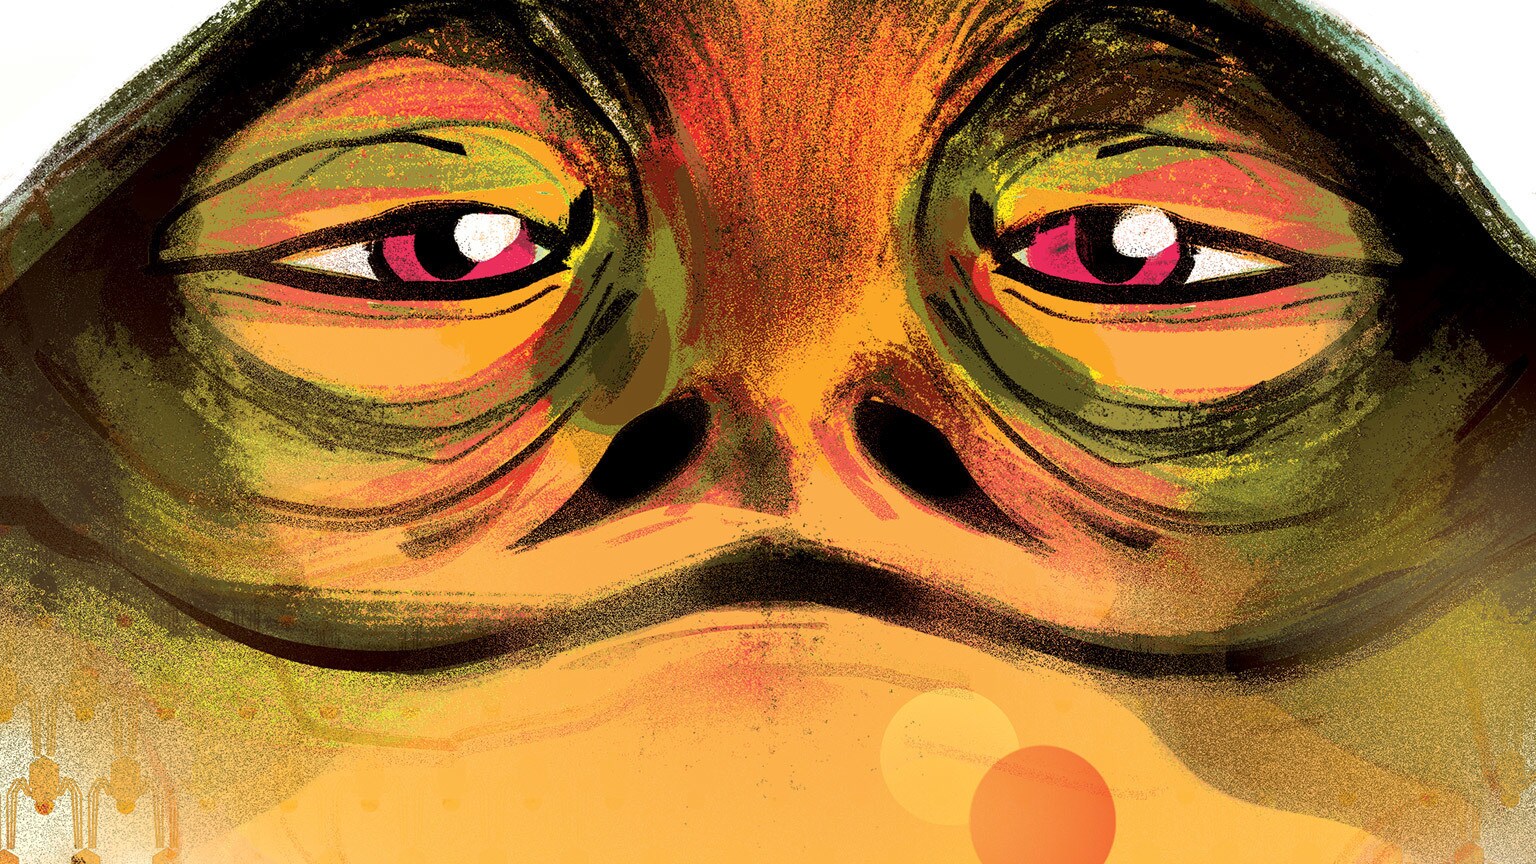 Revisit Jabba the Hutt in Return to Vader’s Castle #4 - Exclusive